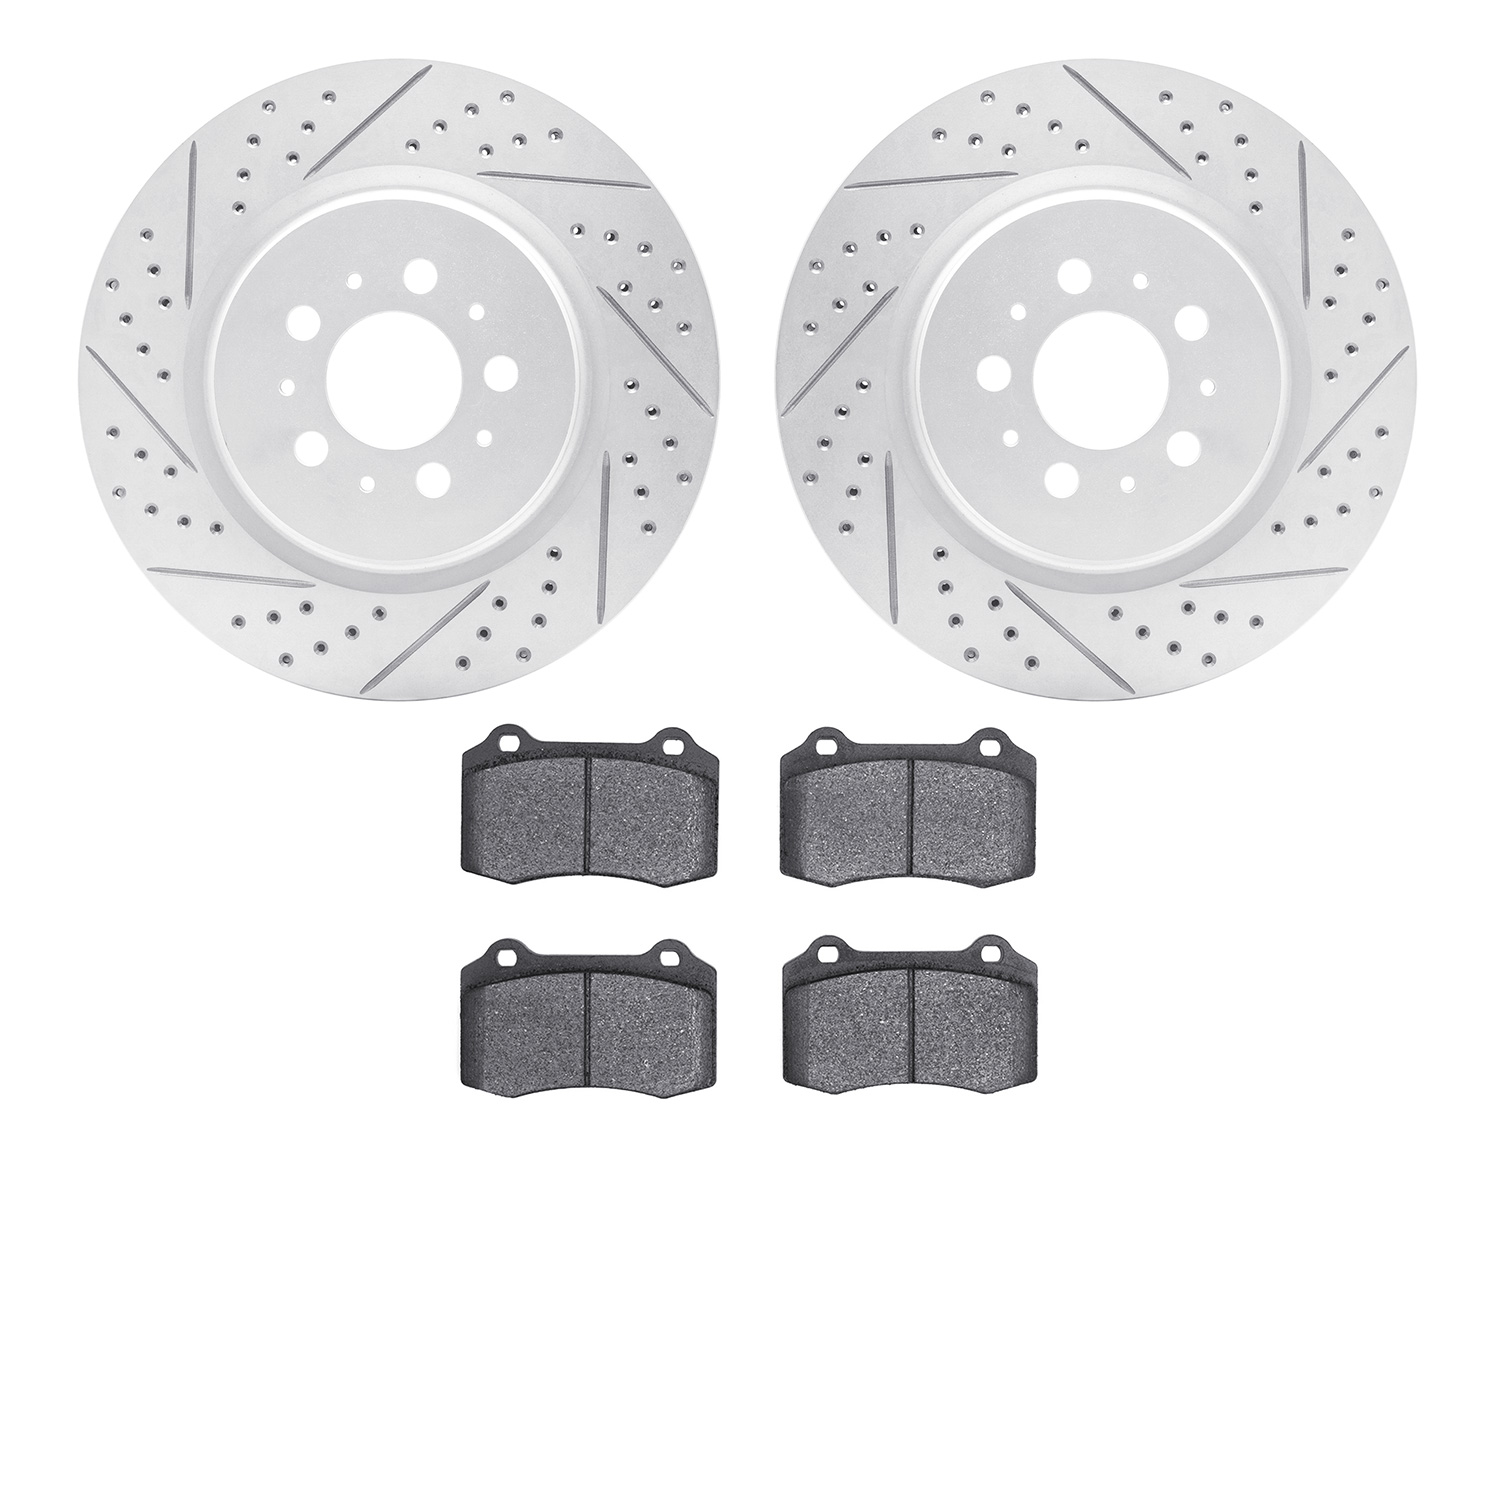 2502-27019 Geoperformance Drilled/Slotted Rotors w/5000 Advanced Brake Pads Kit, 2004-2007 Volvo, Position: Rear